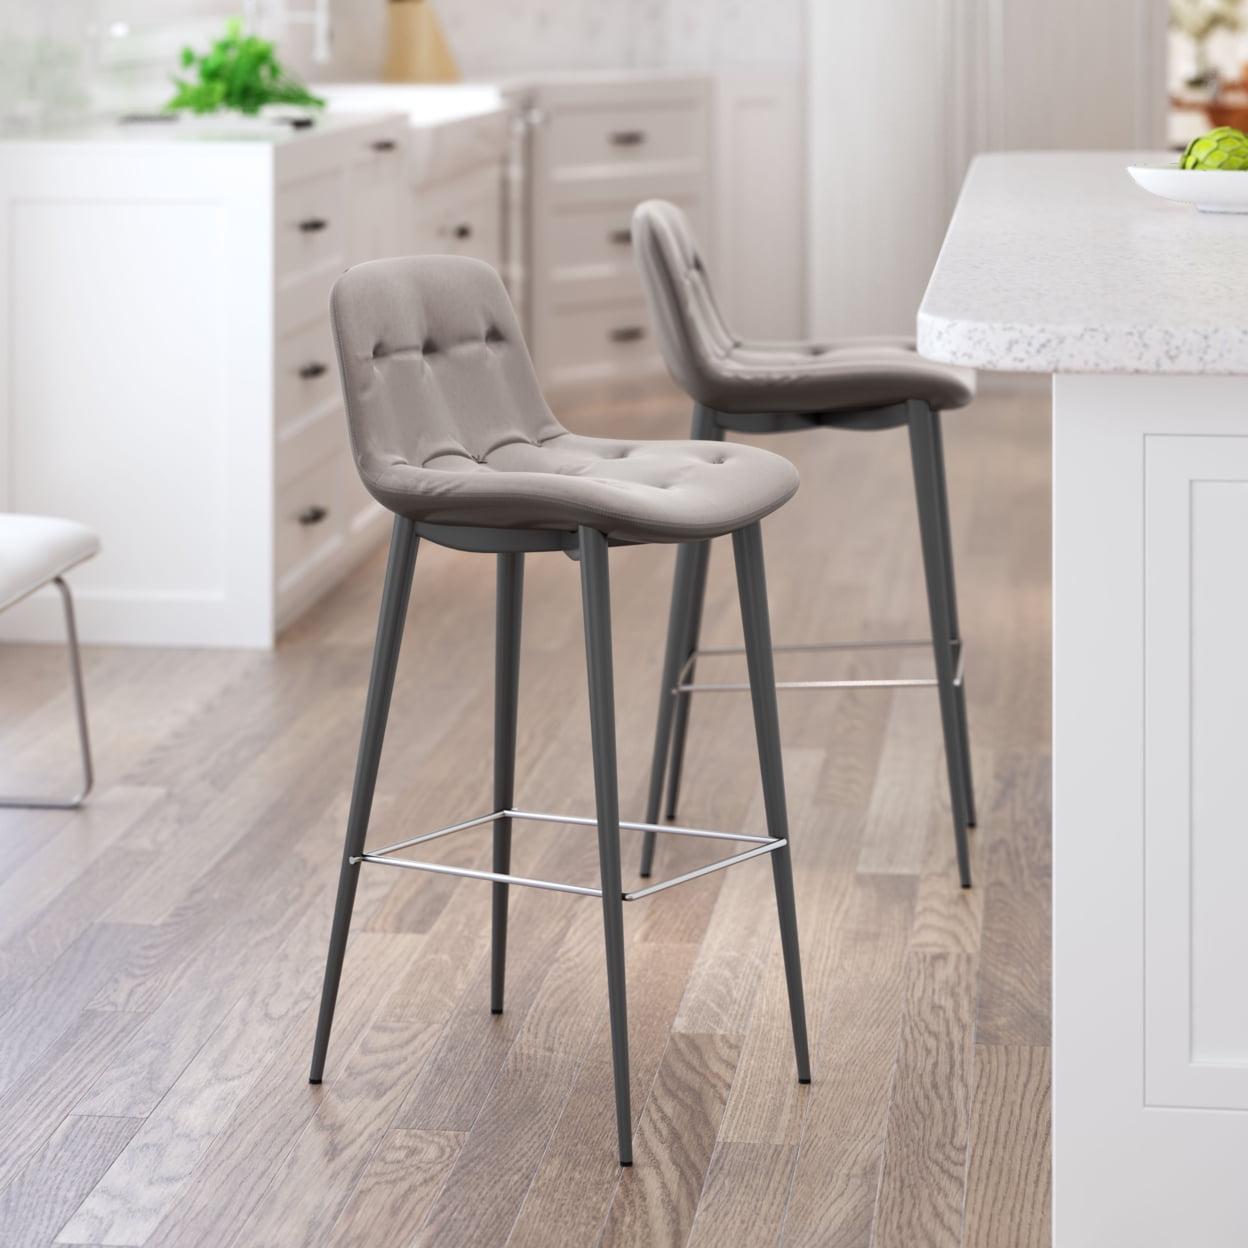 Transitional Taupe Tufted Leather Bar Stool with Metal Legs